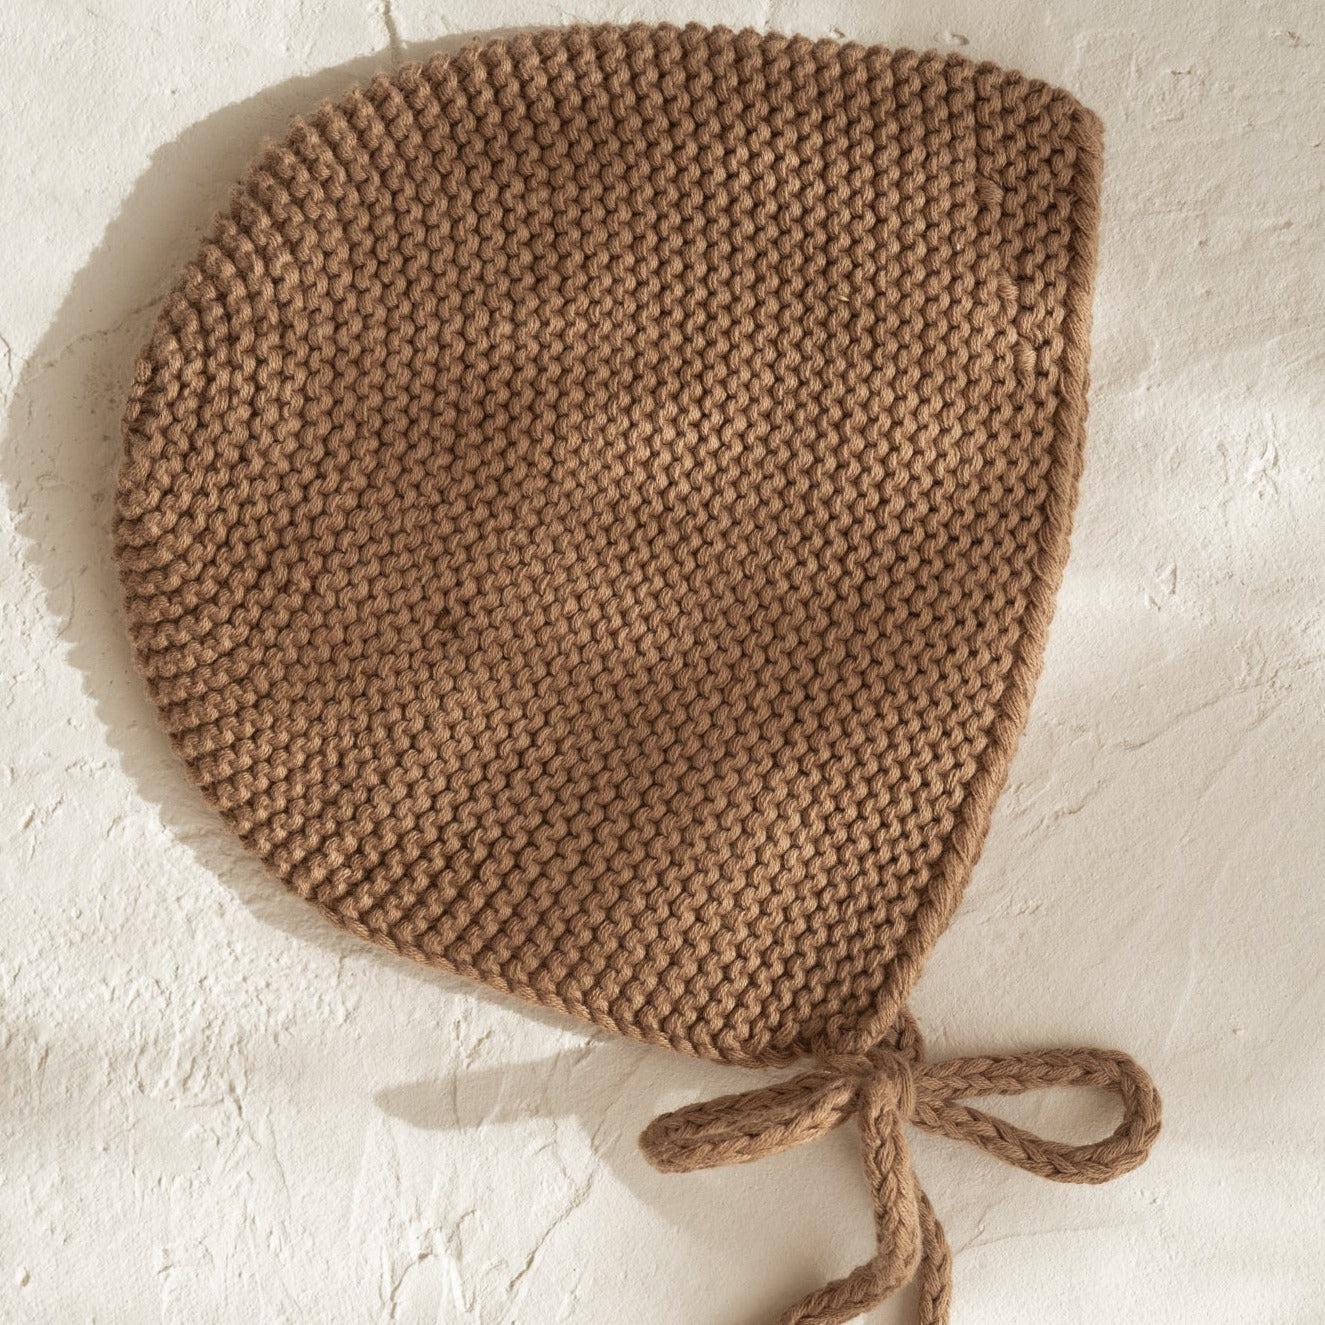 An illoura baby bonnet in chocolate on a white wall.